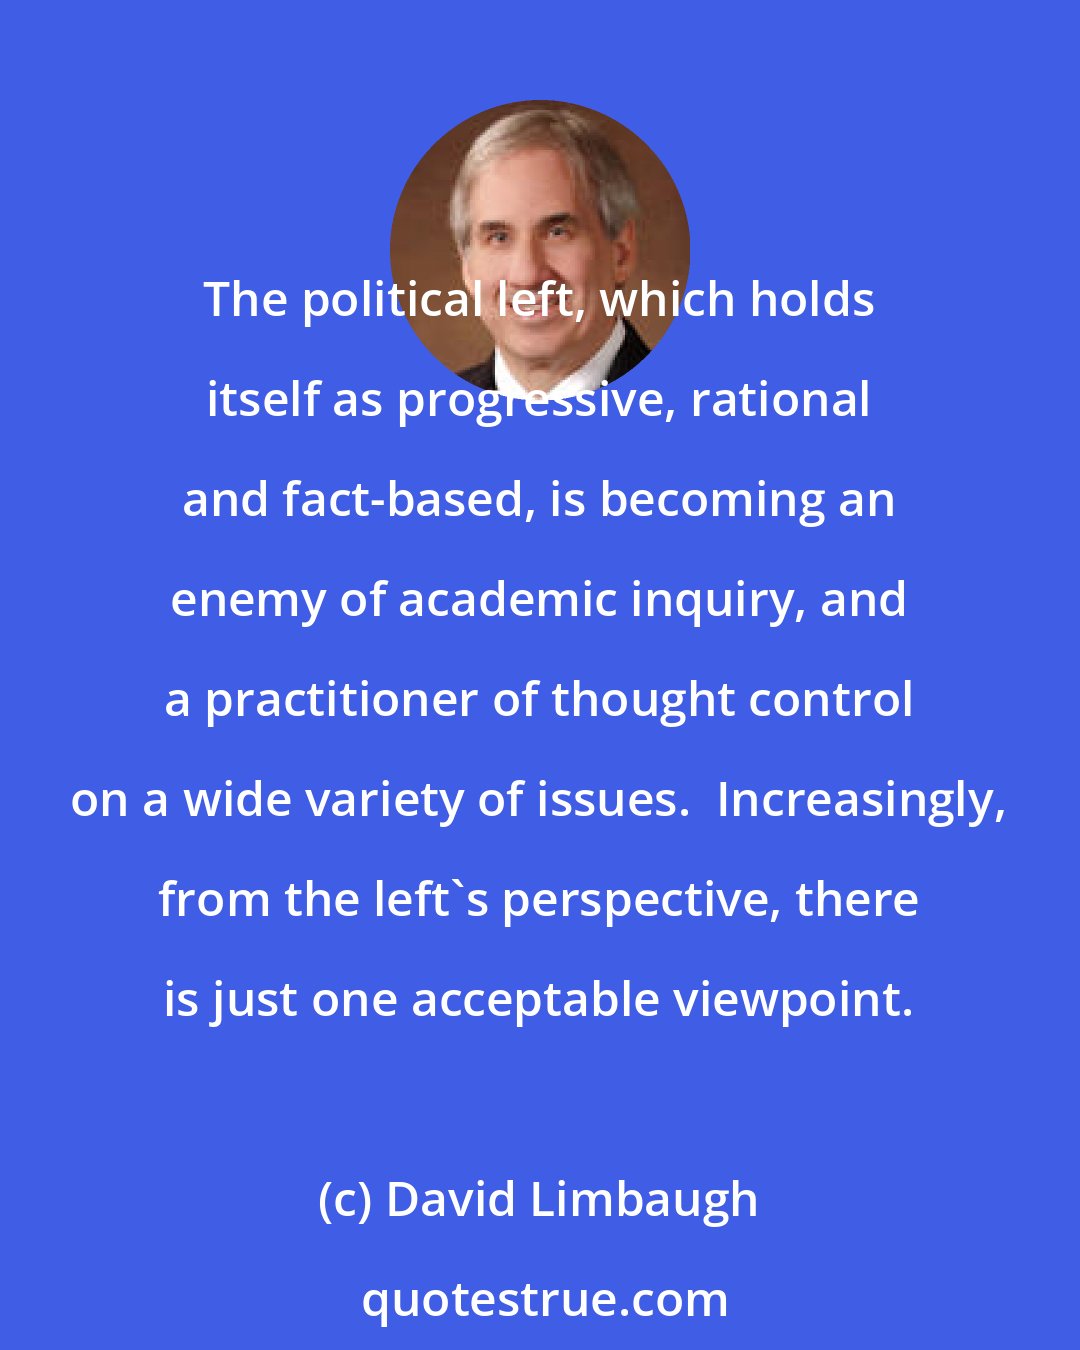 David Limbaugh: The political left, which holds itself as progressive, rational and fact-based, is becoming an enemy of academic inquiry, and a practitioner of thought control on a wide variety of issues.  Increasingly, from the left's perspective, there is just one acceptable viewpoint.